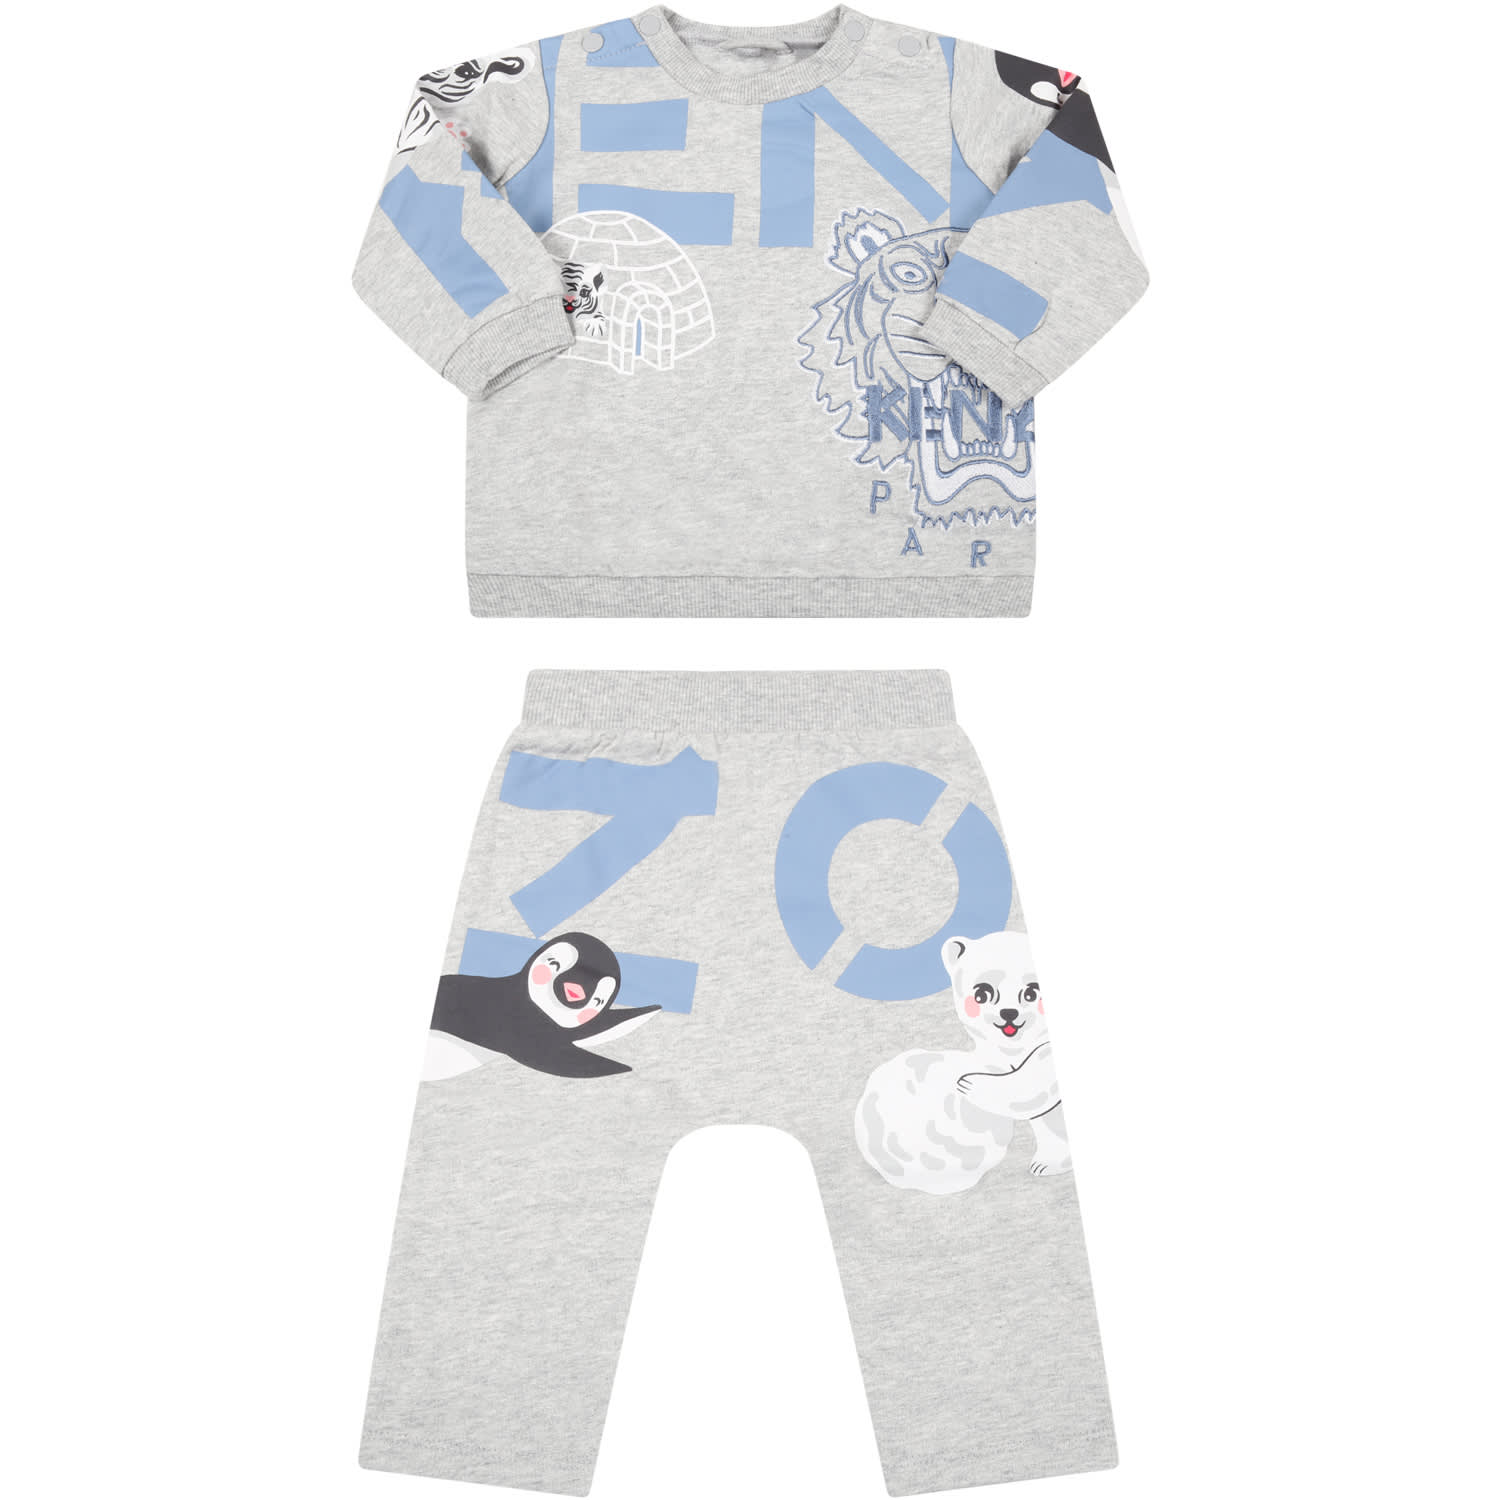 Kenzo Kids Grey Tracksuit For Baby Boy With Iconic Prints